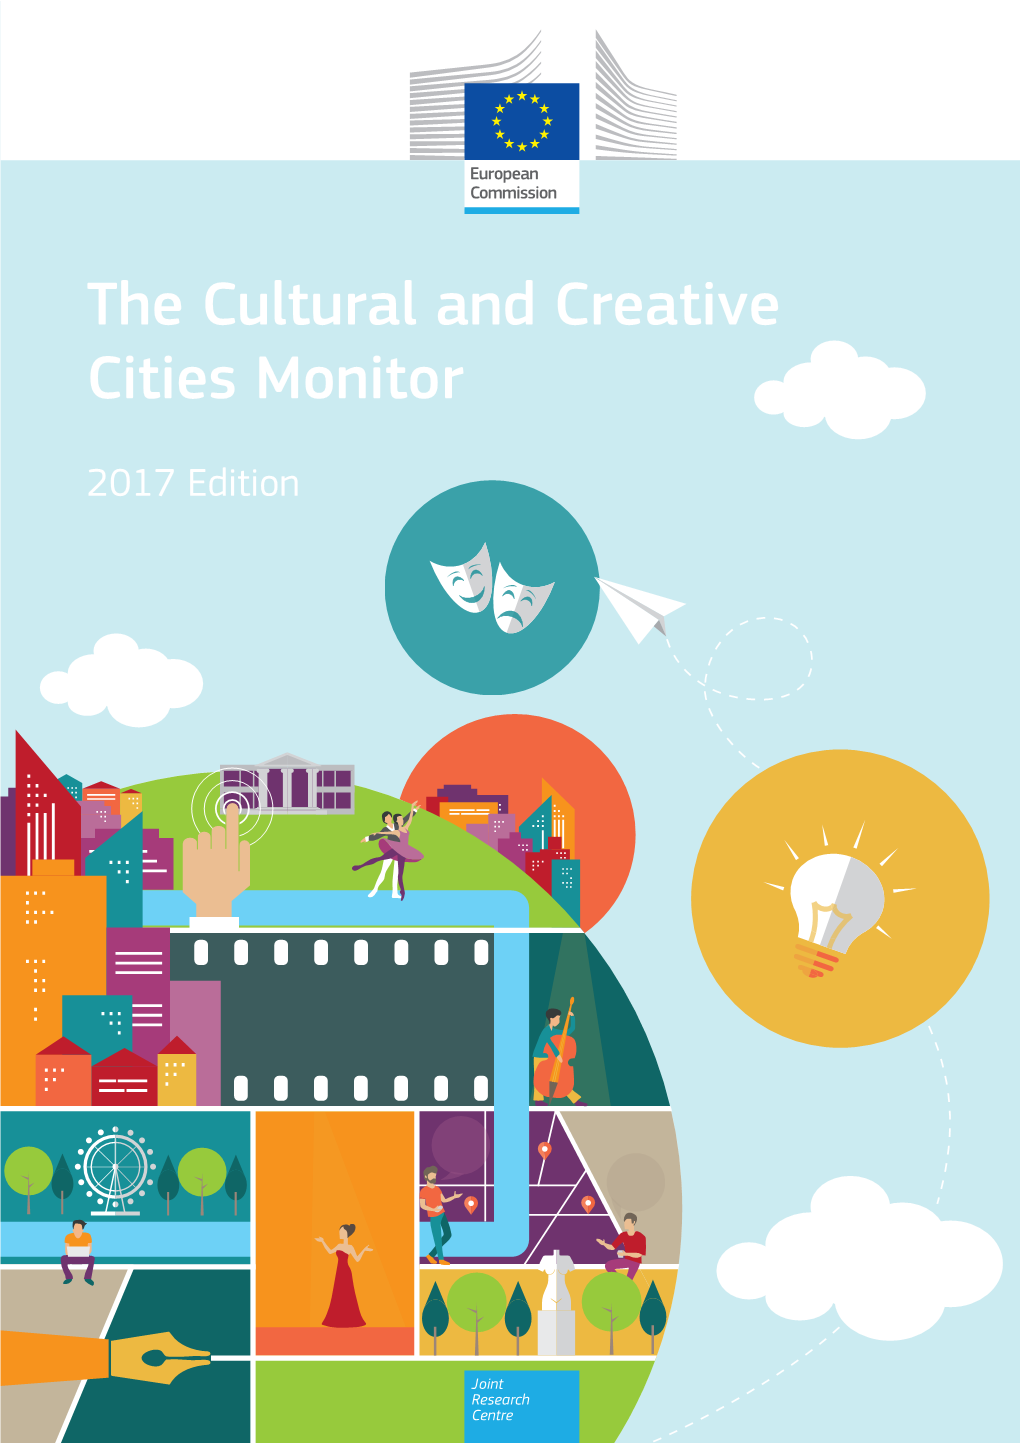 The Cultural and Creative Cities Monitor